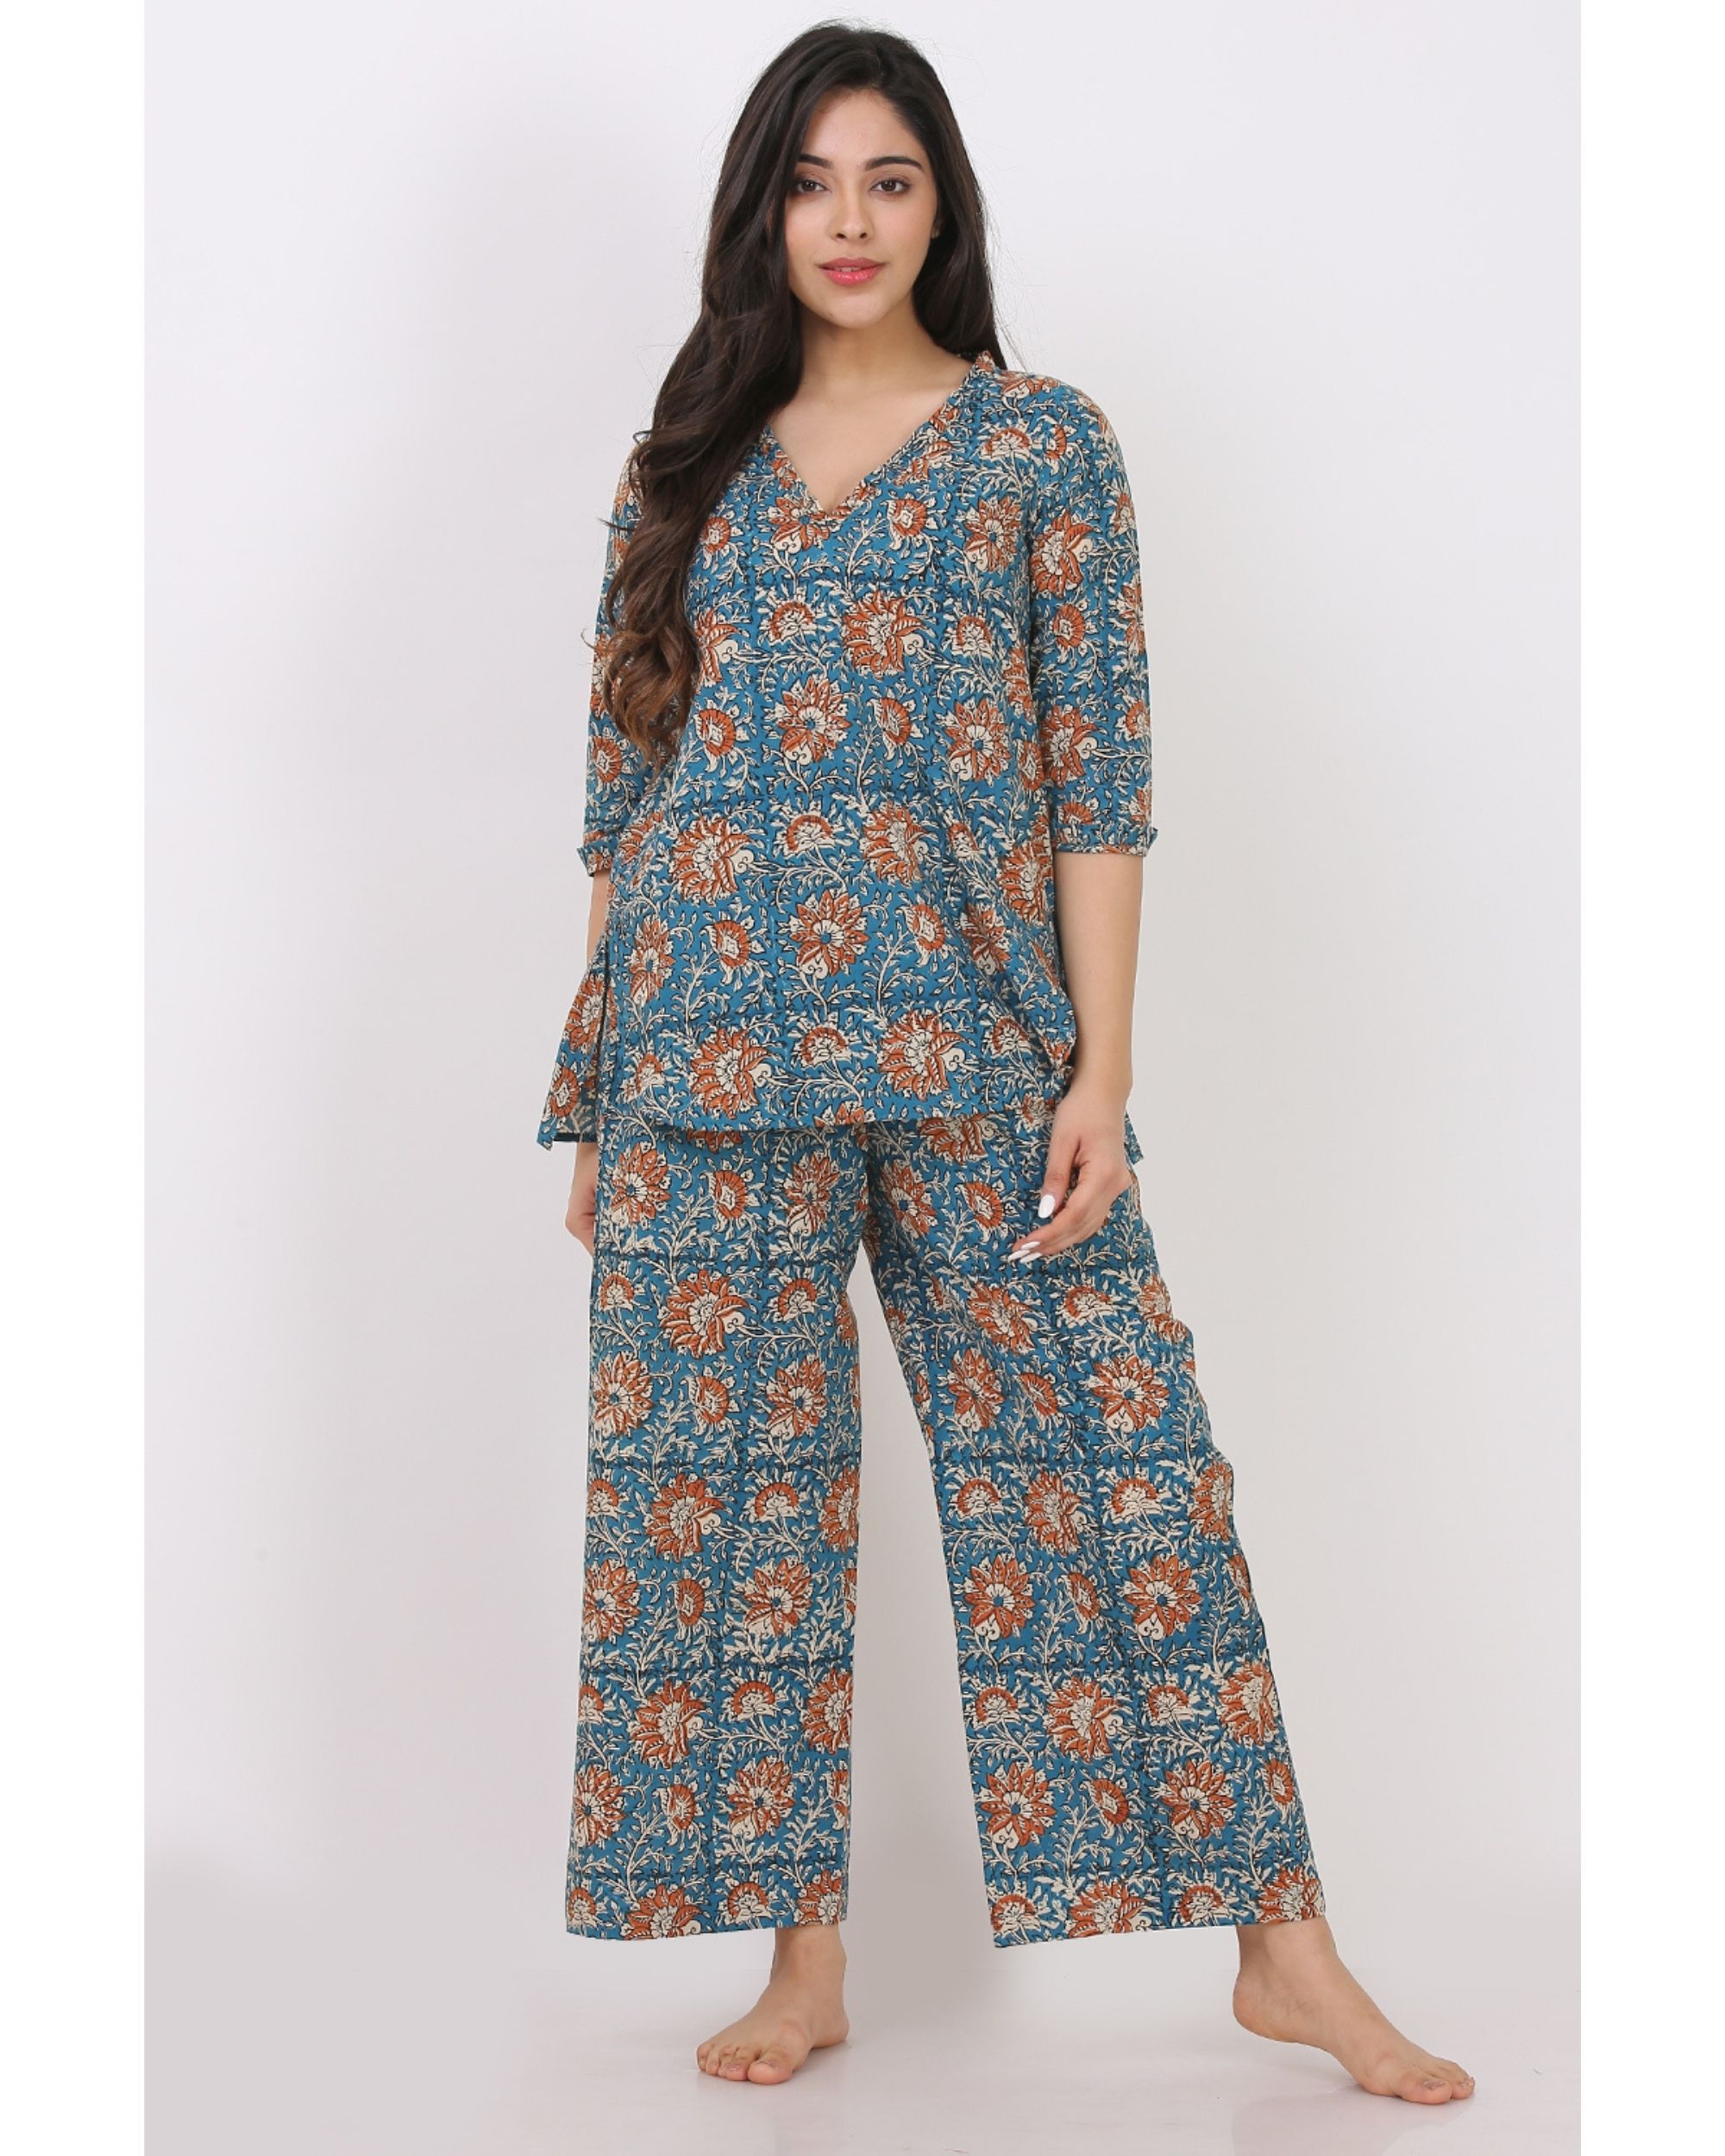 Blue floral printed top with pants - set of two